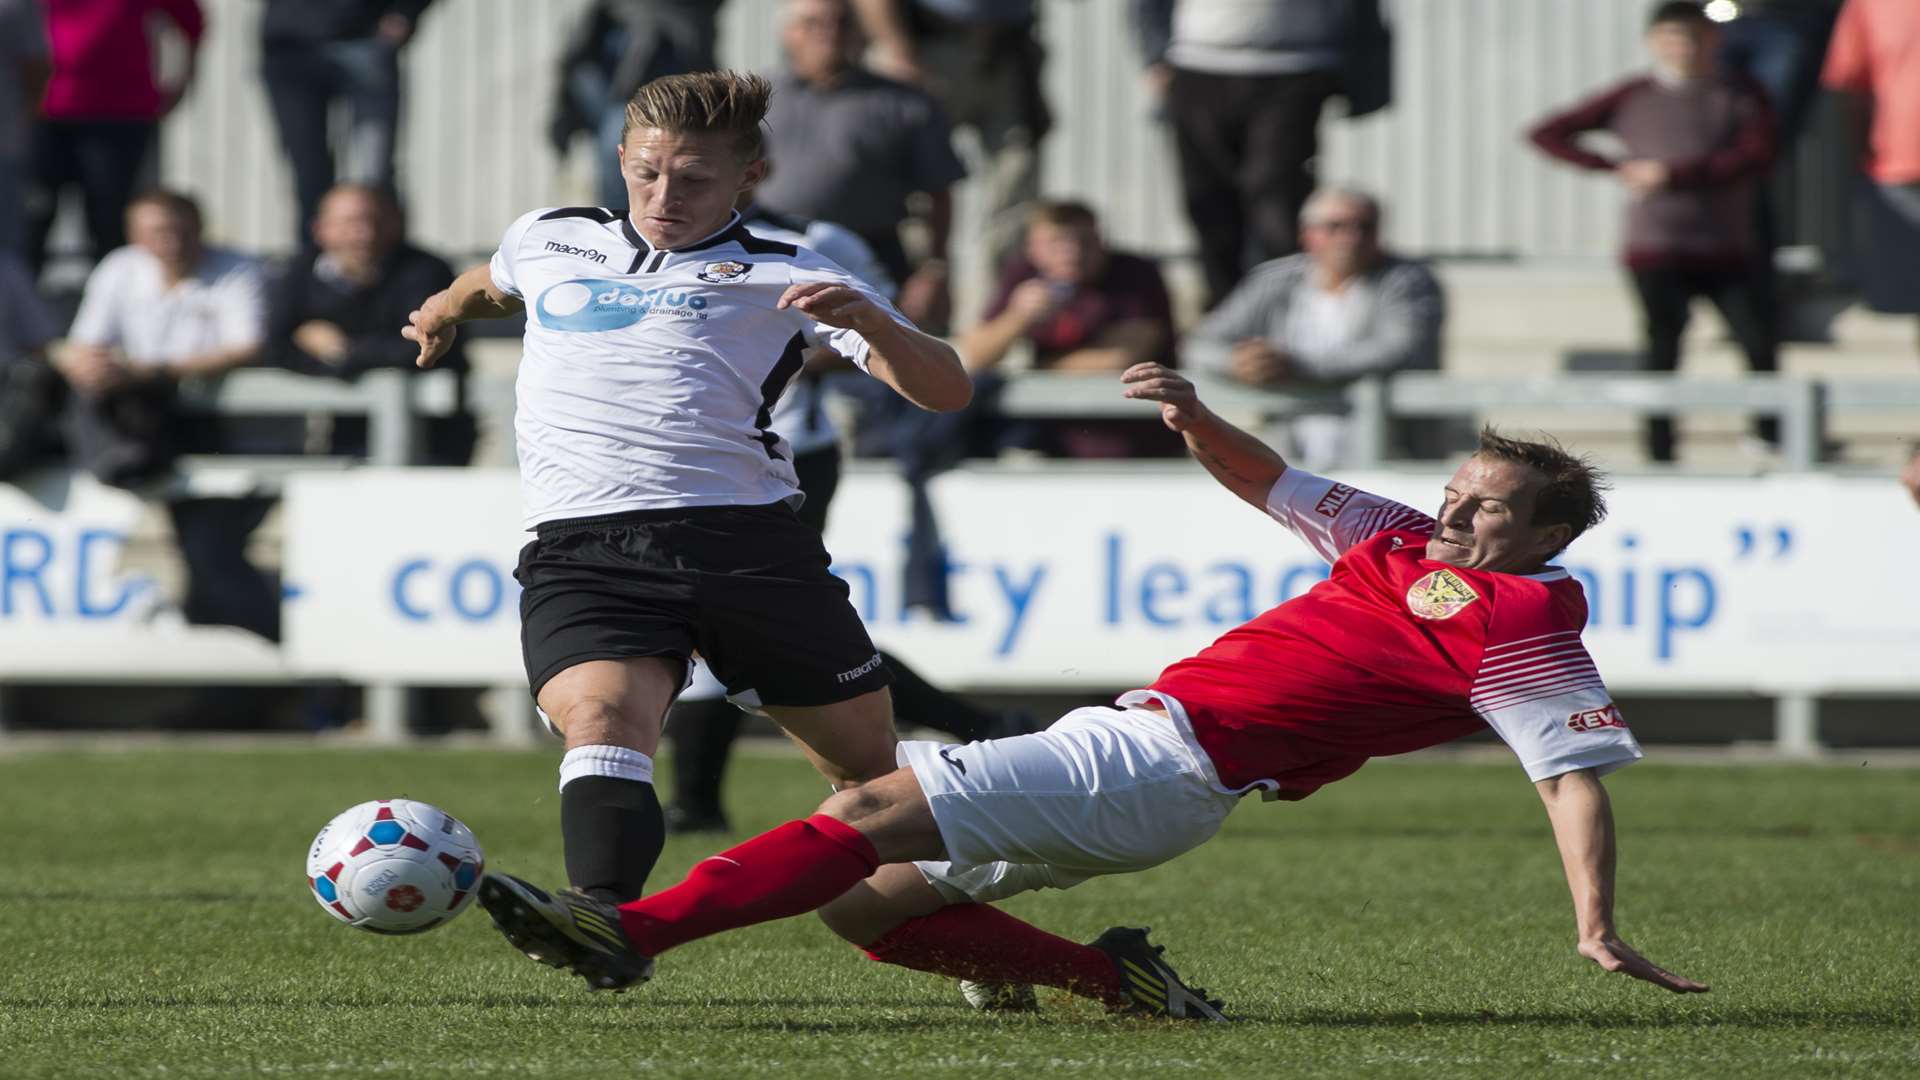 Andy Pugh is tackled during Dartford's FA Cup defeat against Uxbridge Picture: Andy Payton